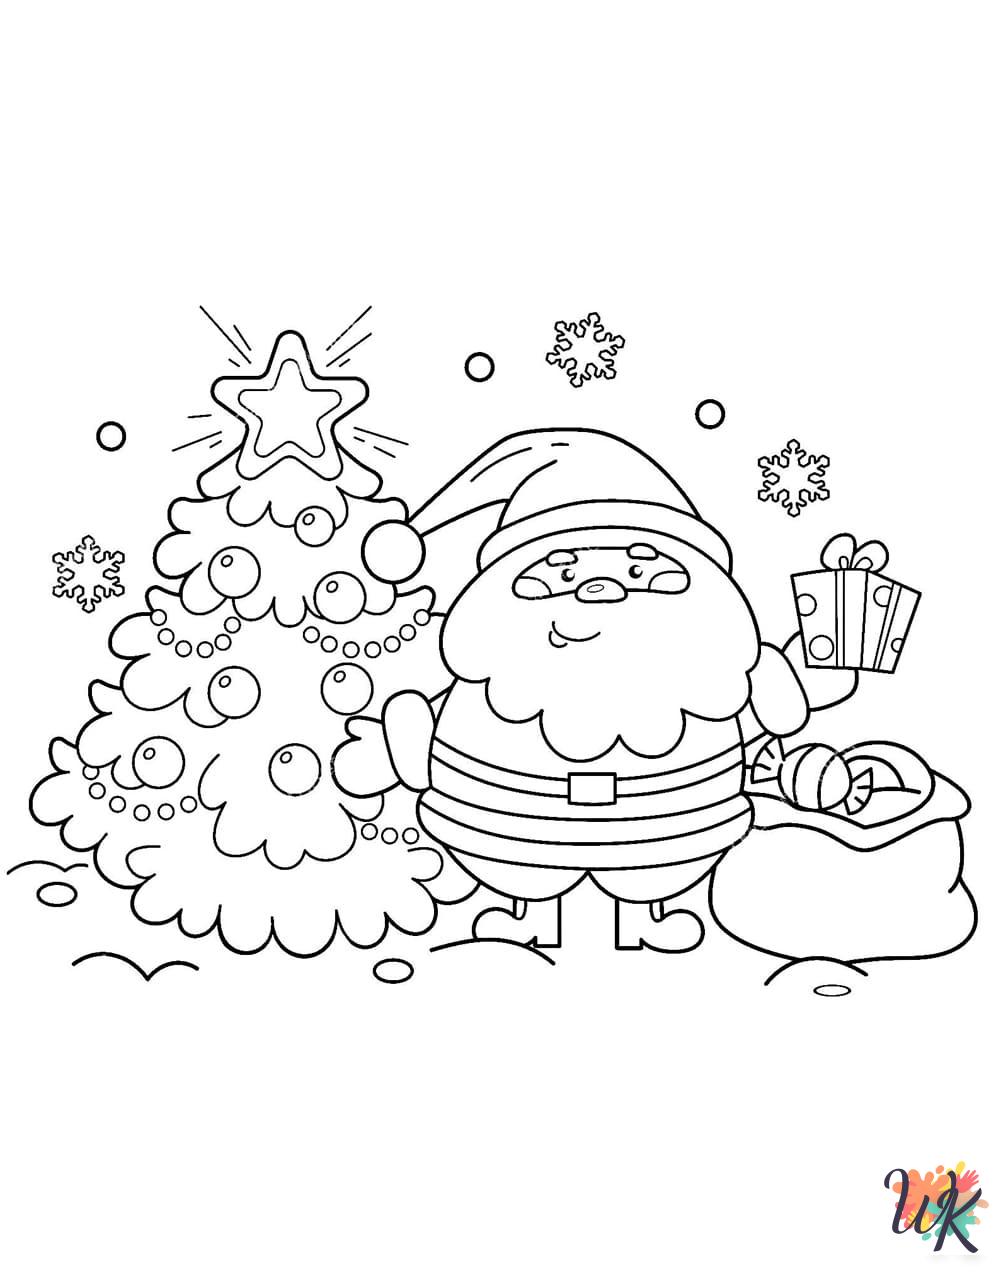 free printable Santa coloring pages for adults